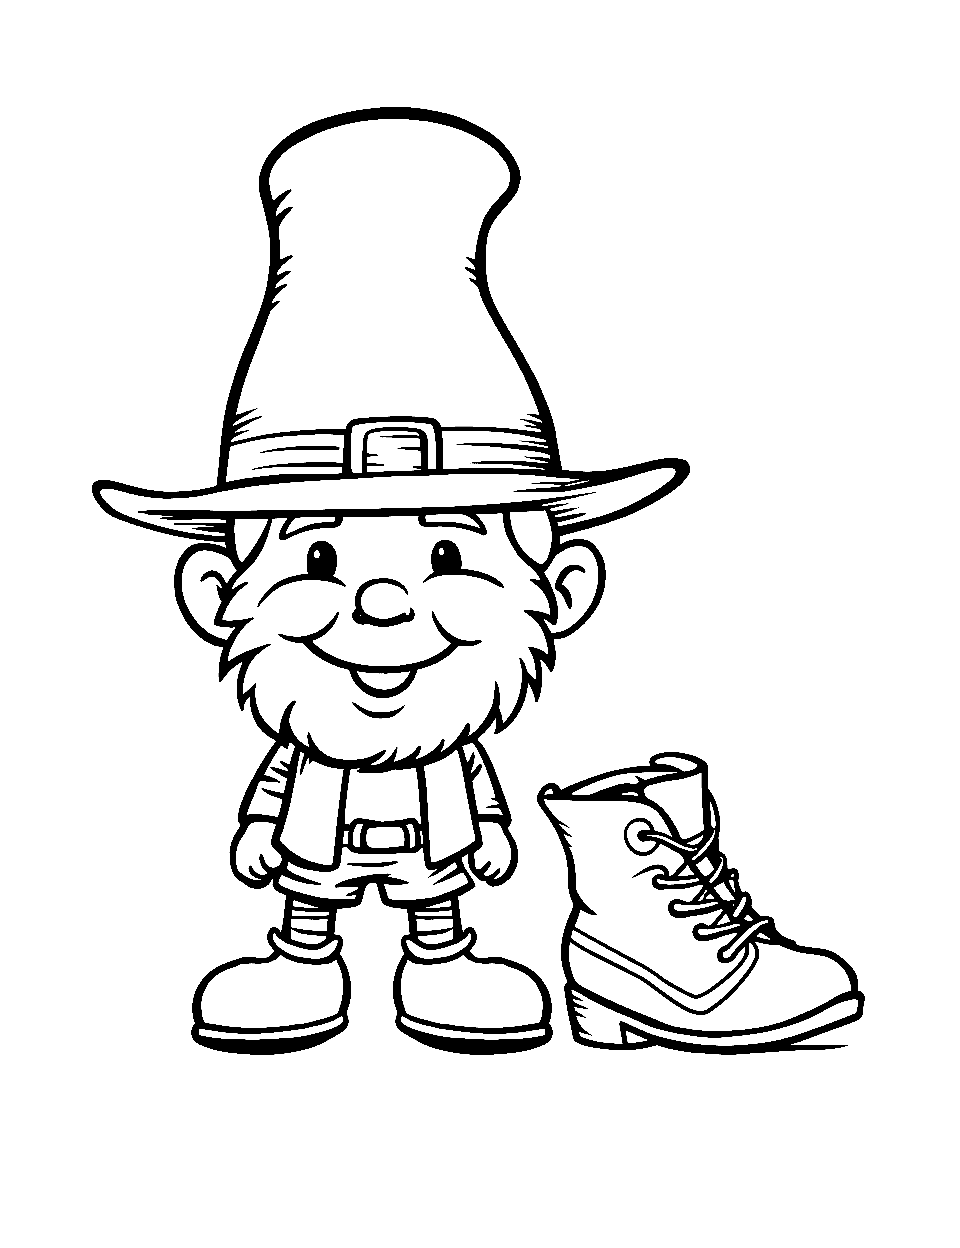 Small Leprechaun Beside a Shoe Coloring Page - A tiny leprechaun standing beside a human-sized shoe for scale.